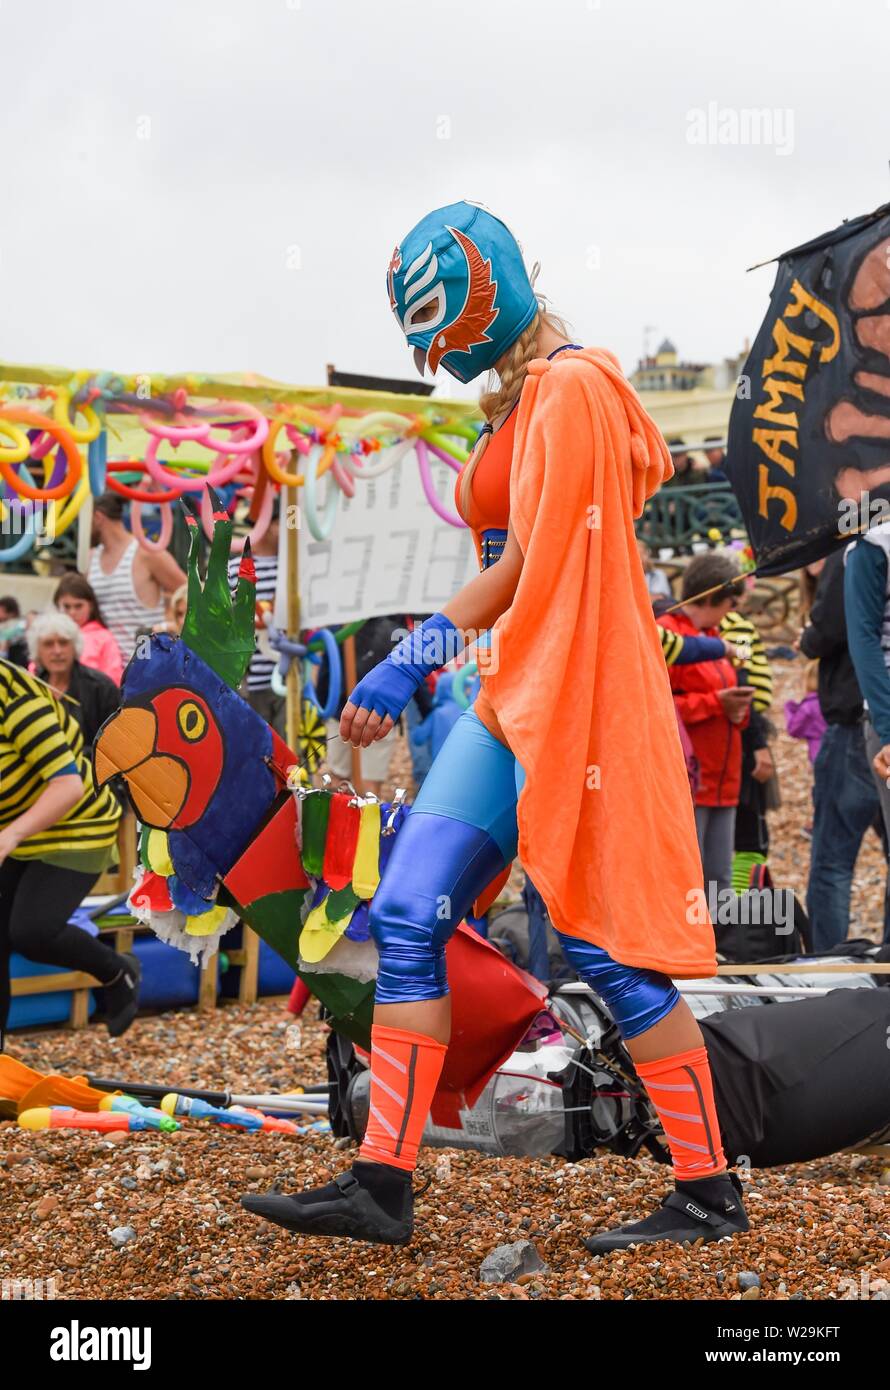 Brighton UK 7th July 2019 -  Competitors dressed in Mexican wrestling outfits  prepare for this years Paddle Round the Pier beach festival in Brighton . The annual Paddle Round the Pier is now the largest free beach festival in Europe raising money for various charities including Surfers Against Sewage  . Credit : Simon Dack / Alamy Live News Stock Photo